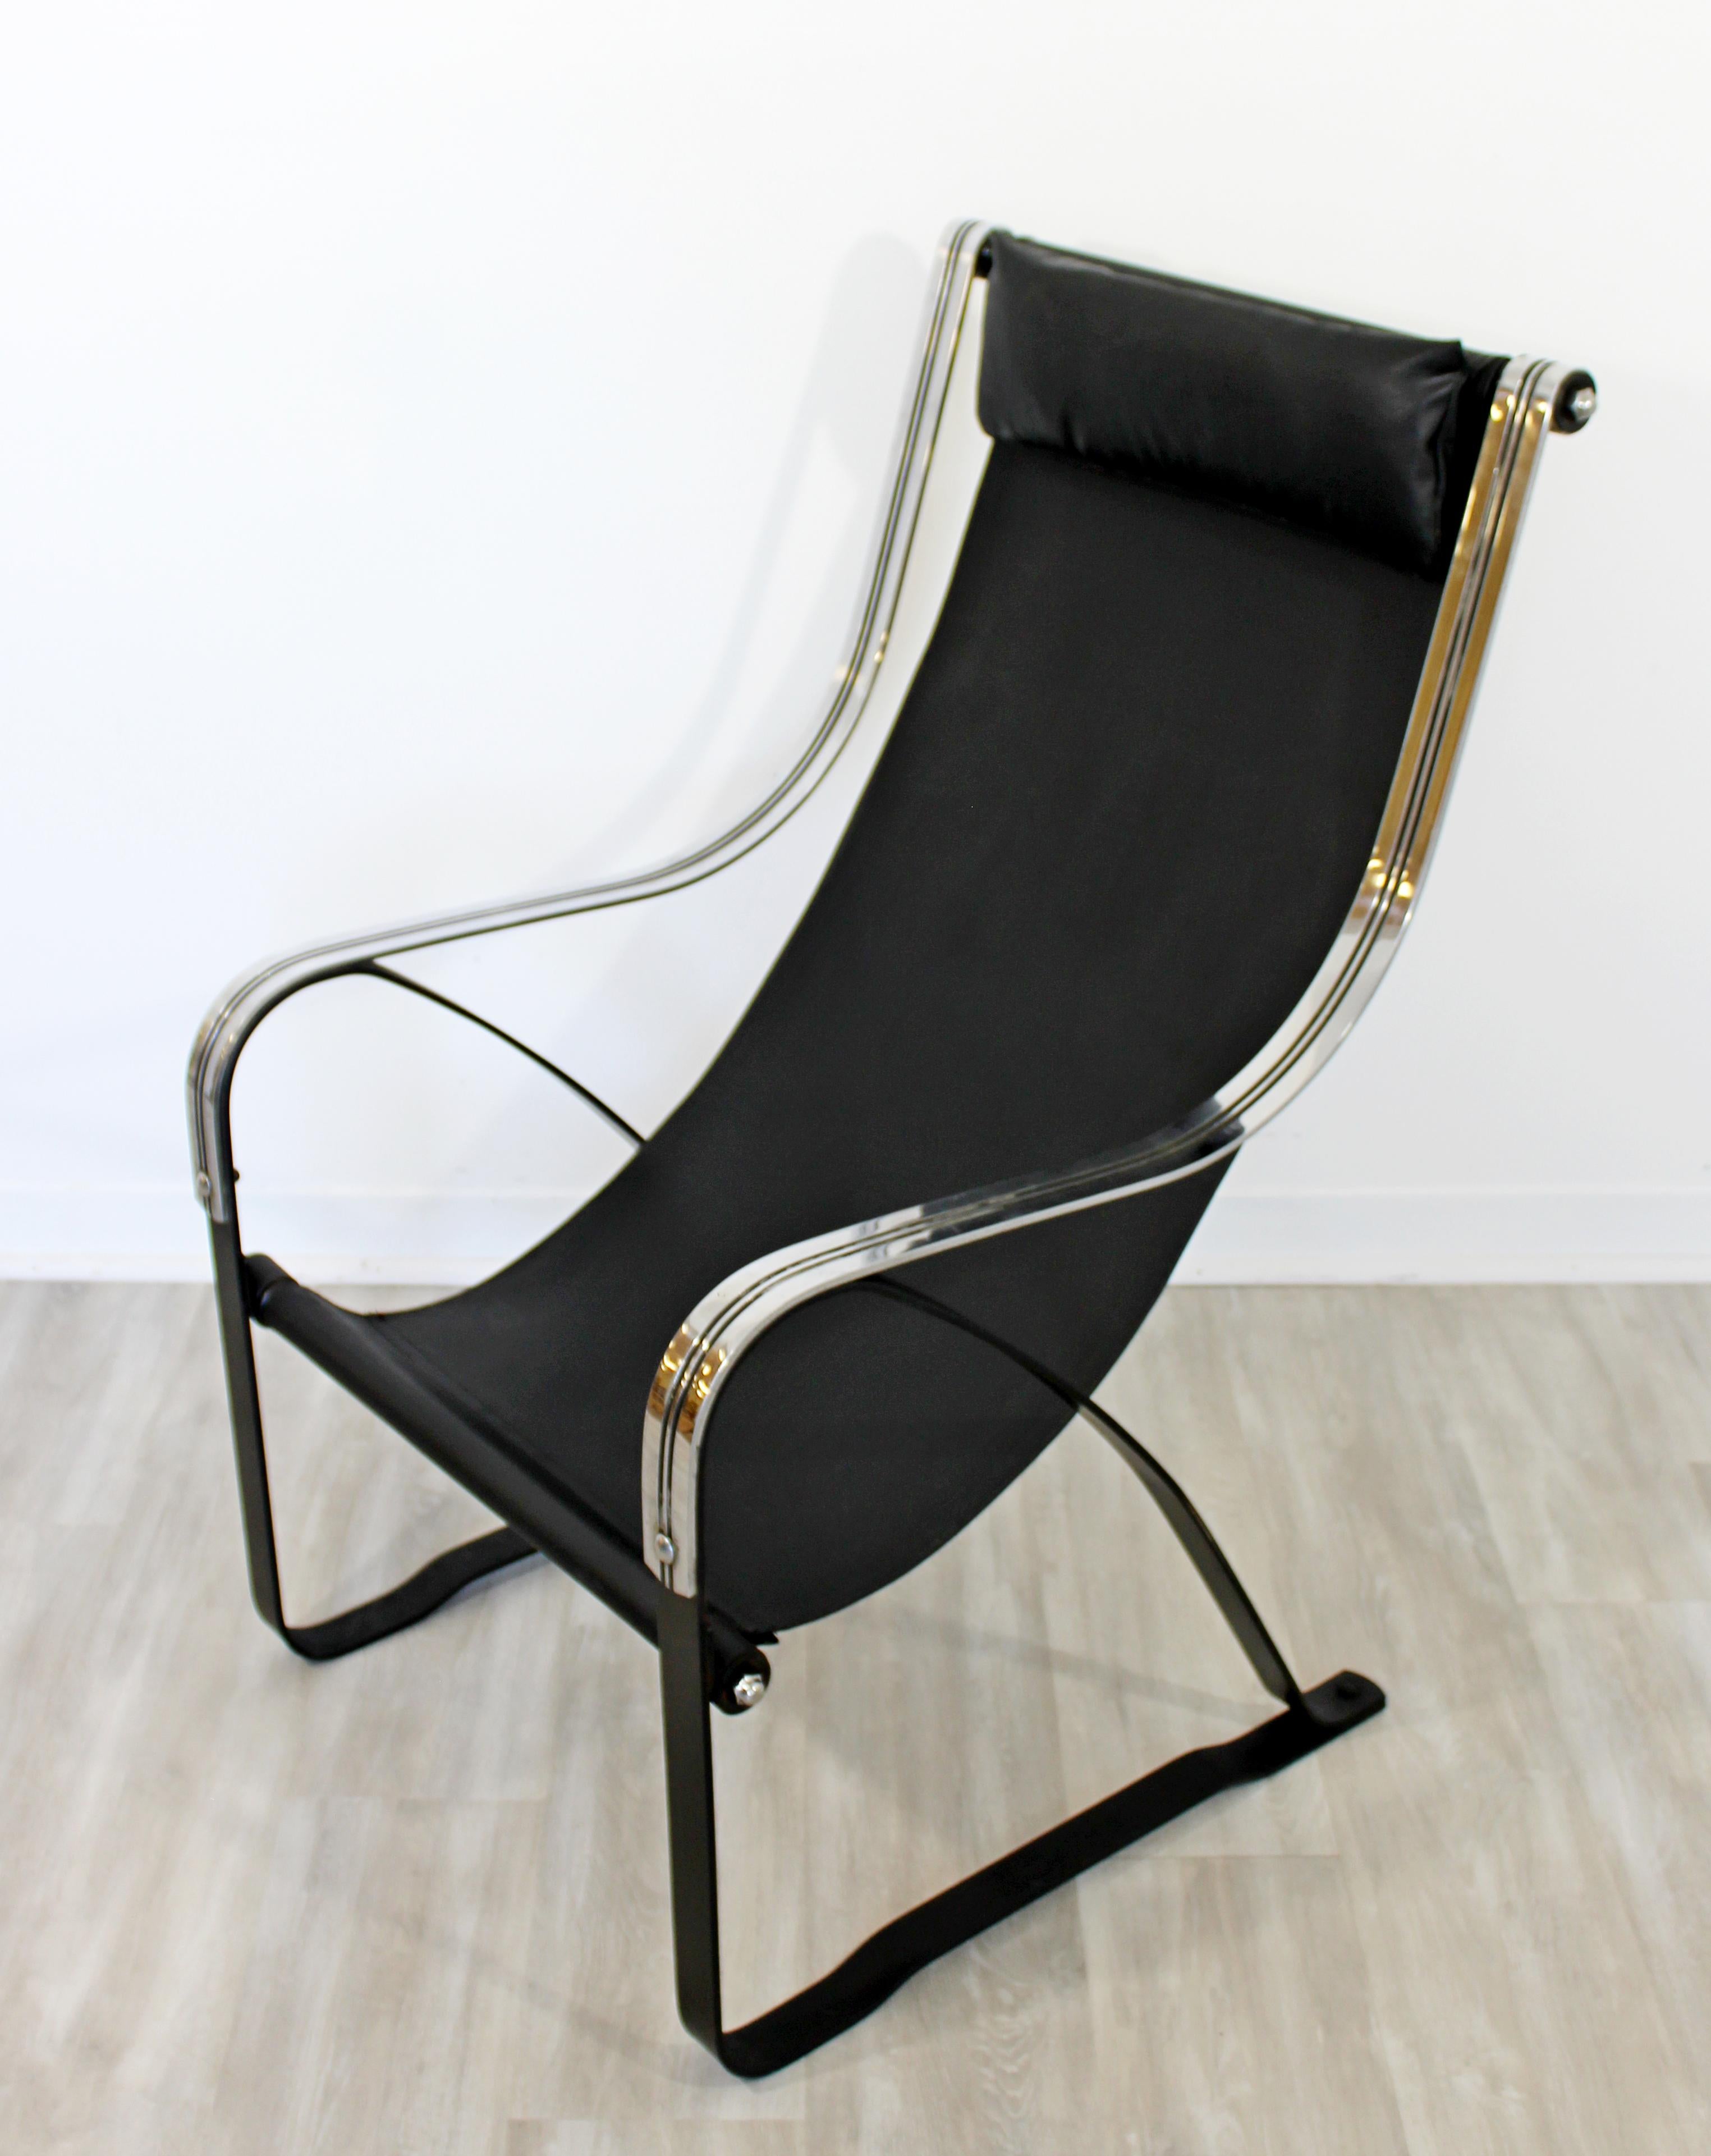 For your consideration is a phenomenal, sling, cantilever chrome armchair, with a high back and black leather upholstery, by McKay Craft, circa 1930s. In excellent antique condition. The dimensions are 24